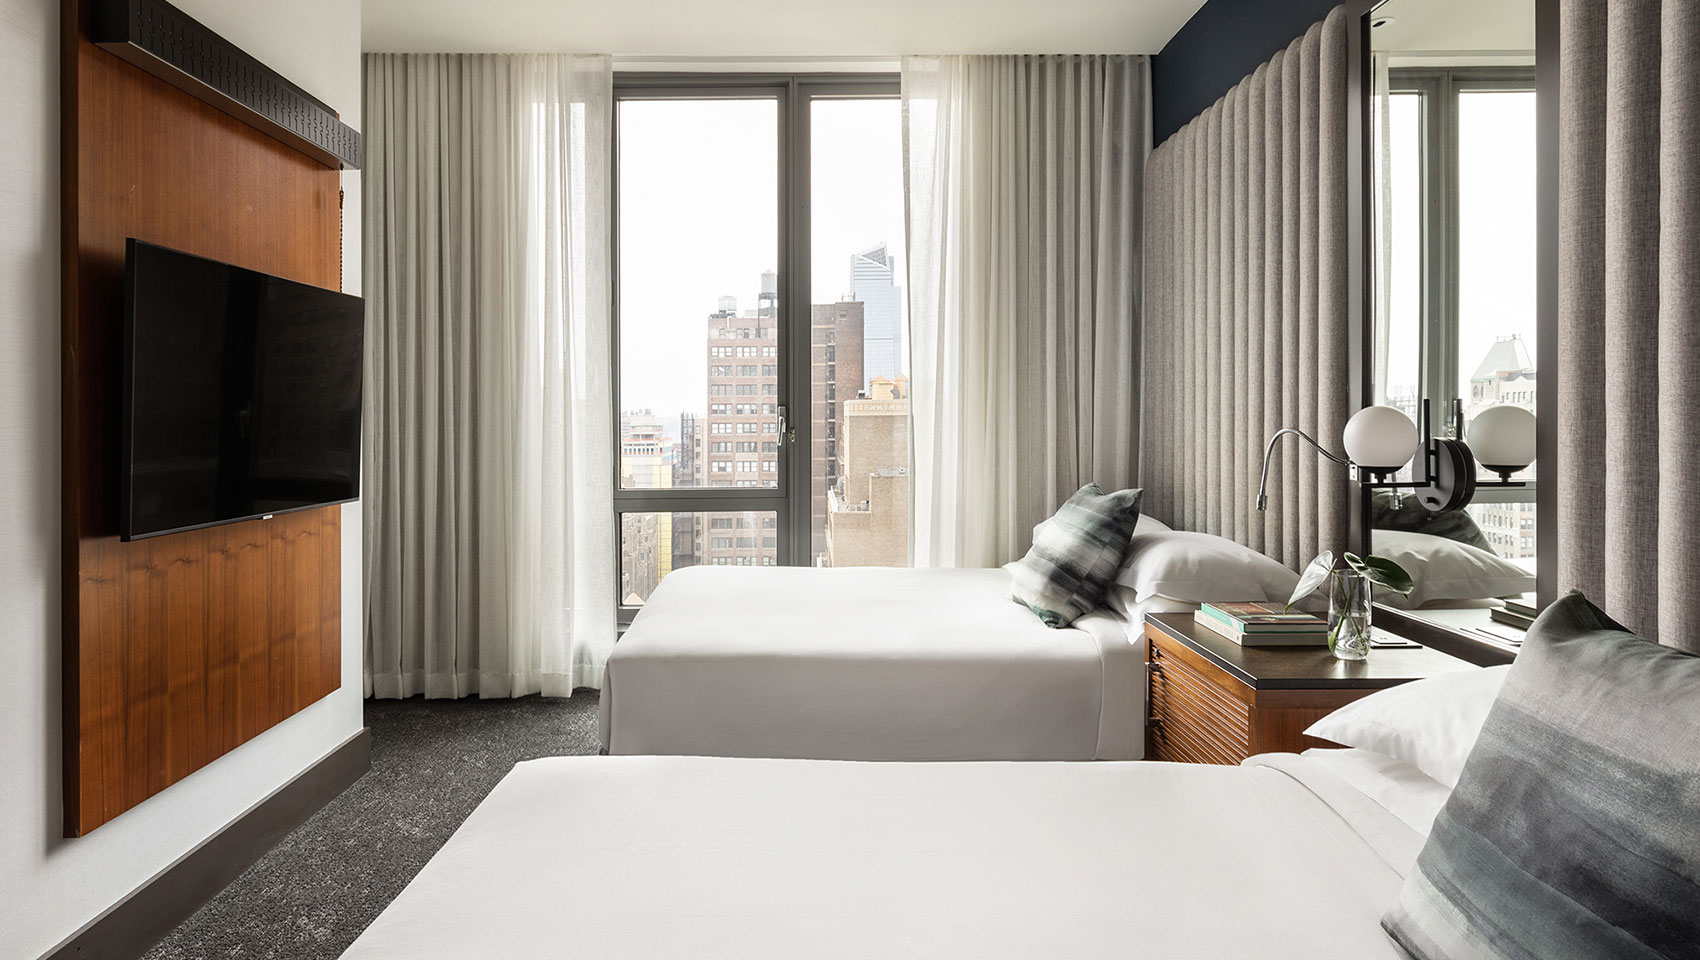 Kimpton Hotel Eventi guest room next to large window overlooking city buildings